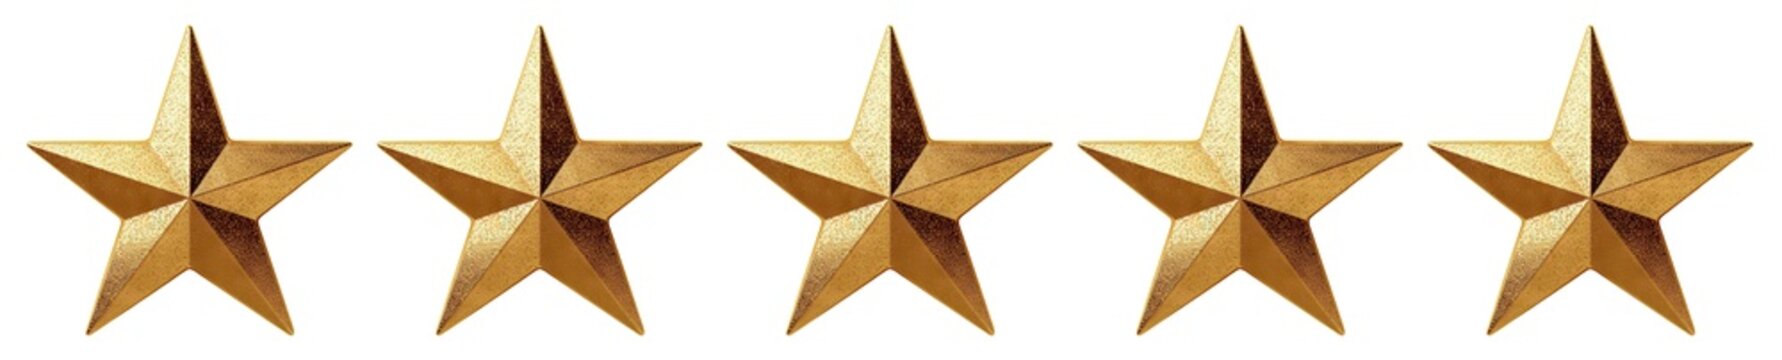 Five golden stars for product rating reviews for websites and mobile applications, cut out